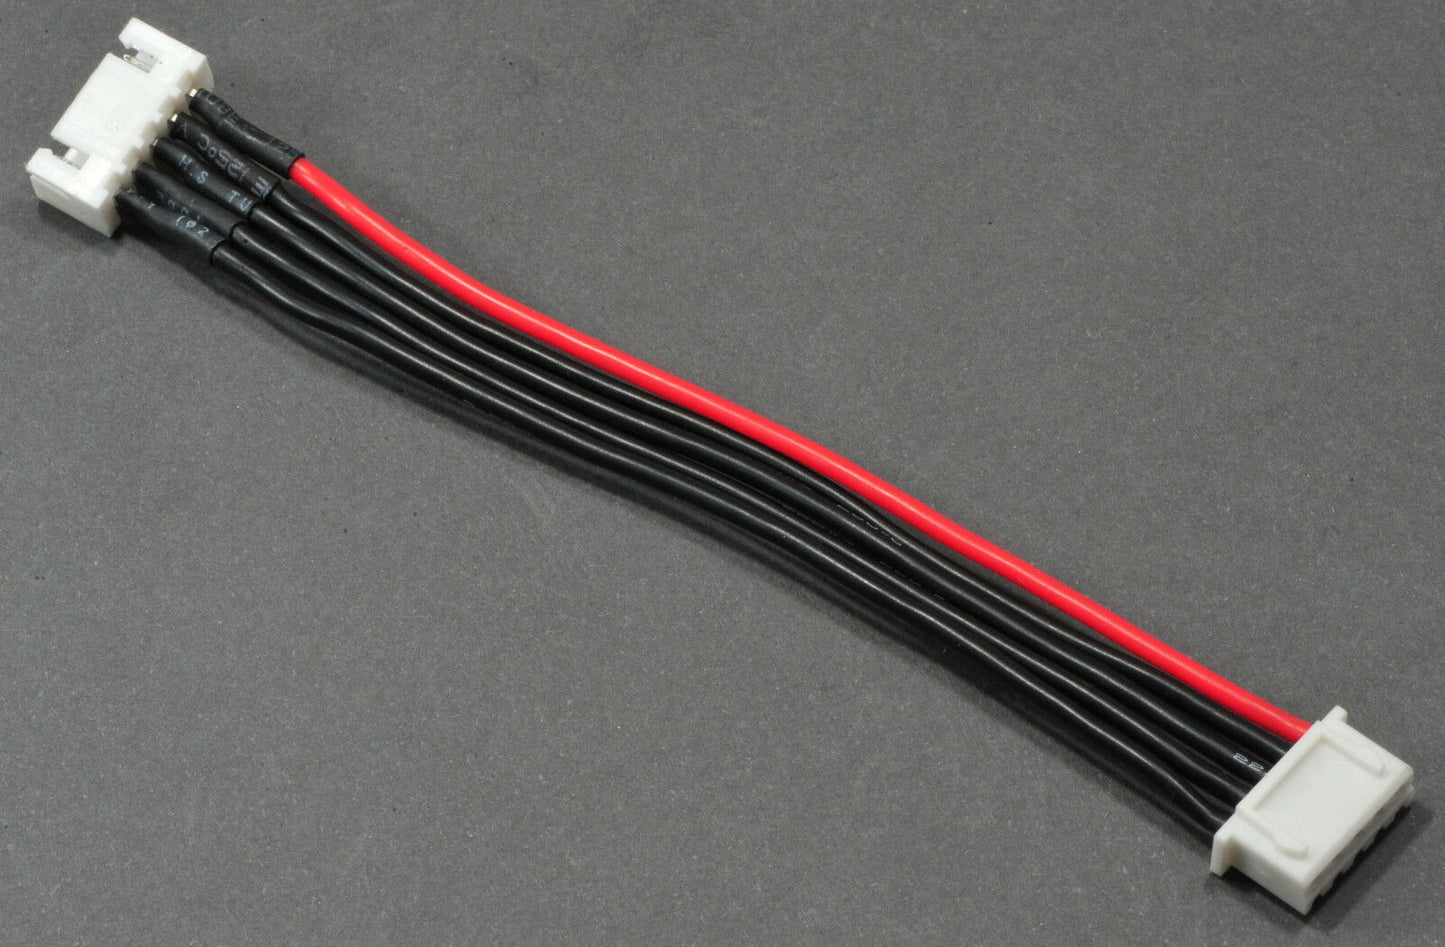 JST-XH Balance Extensions - 10cm 22awg Silicon Wire - 2S - 6S